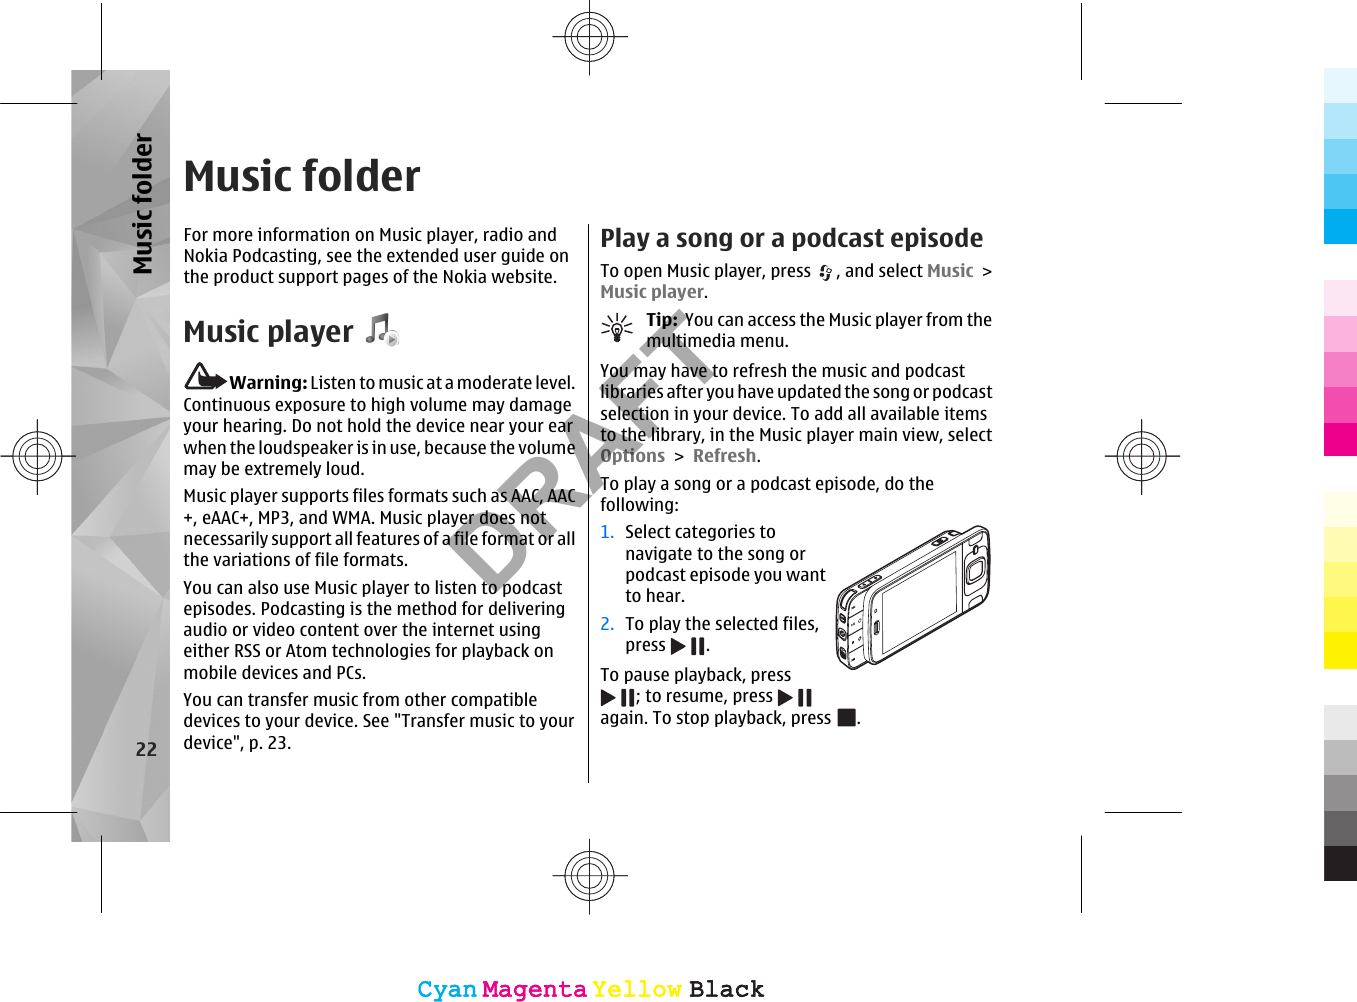 Music folderFor more information on Music player, radio andNokia Podcasting, see the extended user guide onthe product support pages of the Nokia website.Music playerWarning: Listen to music at a moderate level.Continuous exposure to high volume may damageyour hearing. Do not hold the device near your earwhen the loudspeaker is in use, because the volumemay be extremely loud.Music player supports files formats such as AAC, AAC+, eAAC+, MP3, and WMA. Music player does notnecessarily support all features of a file format or allthe variations of file formats.You can also use Music player to listen to podcastepisodes. Podcasting is the method for deliveringaudio or video content over the internet usingeither RSS or Atom technologies for playback onmobile devices and PCs.You can transfer music from other compatibledevices to your device. See &quot;Transfer music to yourdevice&quot;, p. 23.Play a song or a podcast episodeTo open Music player, press  , and select Music &gt;Music player.Tip:  You can access the Music player from themultimedia menu.You may have to refresh the music and podcastlibraries after you have updated the song or podcastselection in your device. To add all available itemsto the library, in the Music player main view, selectOptions &gt; Refresh.To play a song or a podcast episode, do thefollowing:1. Select categories tonavigate to the song orpodcast episode you wantto hear.2. To play the selected files,press  .To pause playback, press; to resume, press again. To stop playback, press  .22Music folderCyanCyanMagentaMagentaYellowYellowBlackBlackCyanCyanMagentaMagentaYellowYellowBlackBlackDRAFT